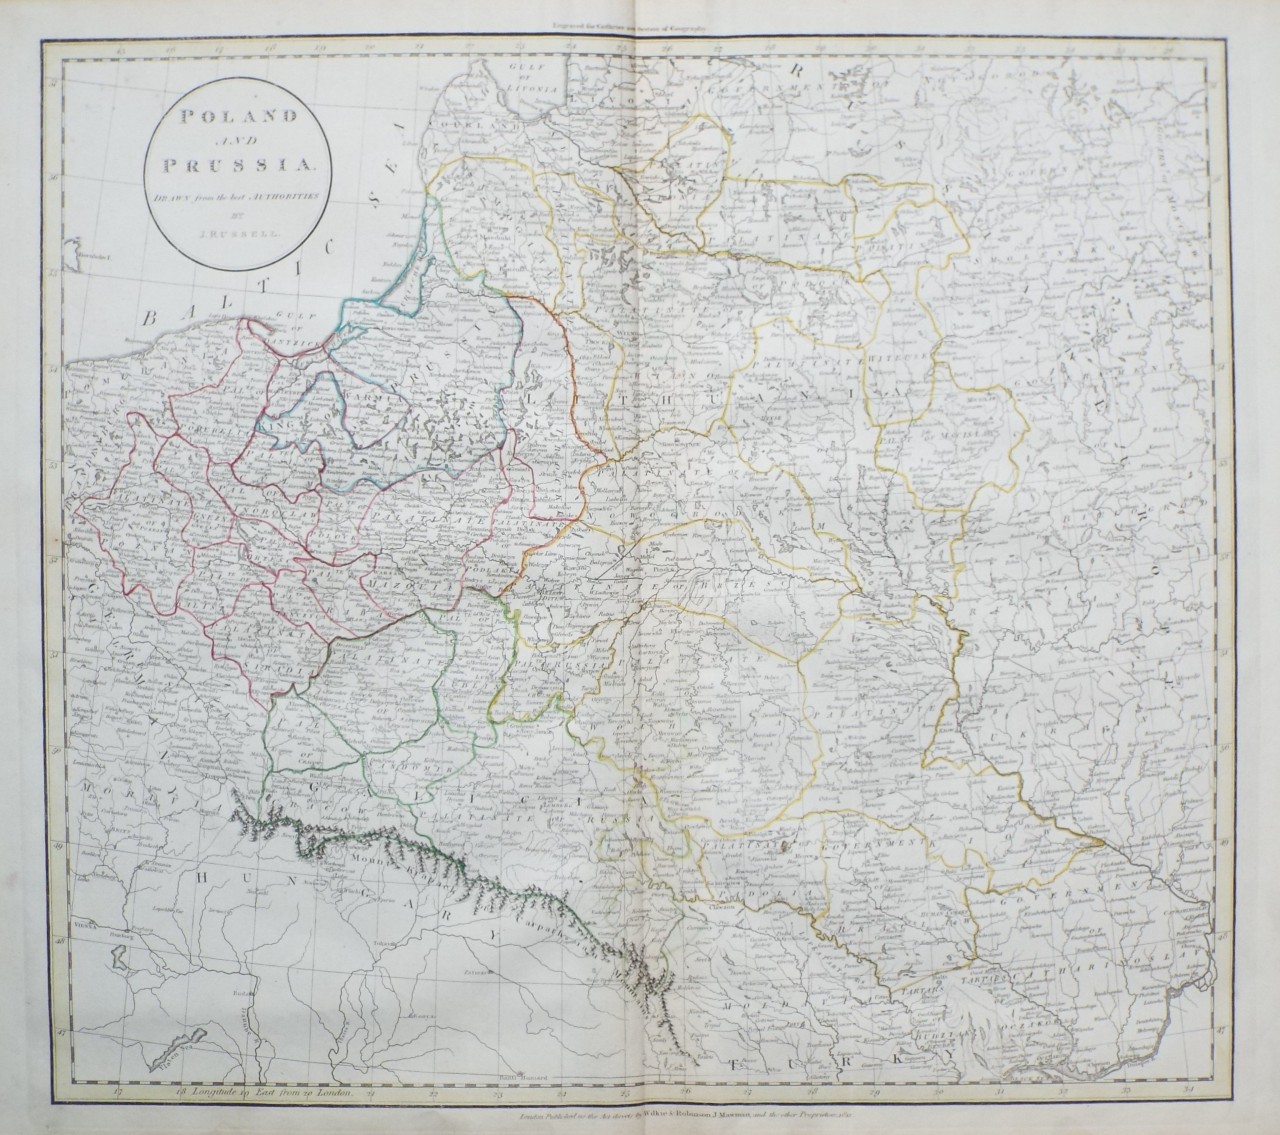 Map of Poland and Prussia